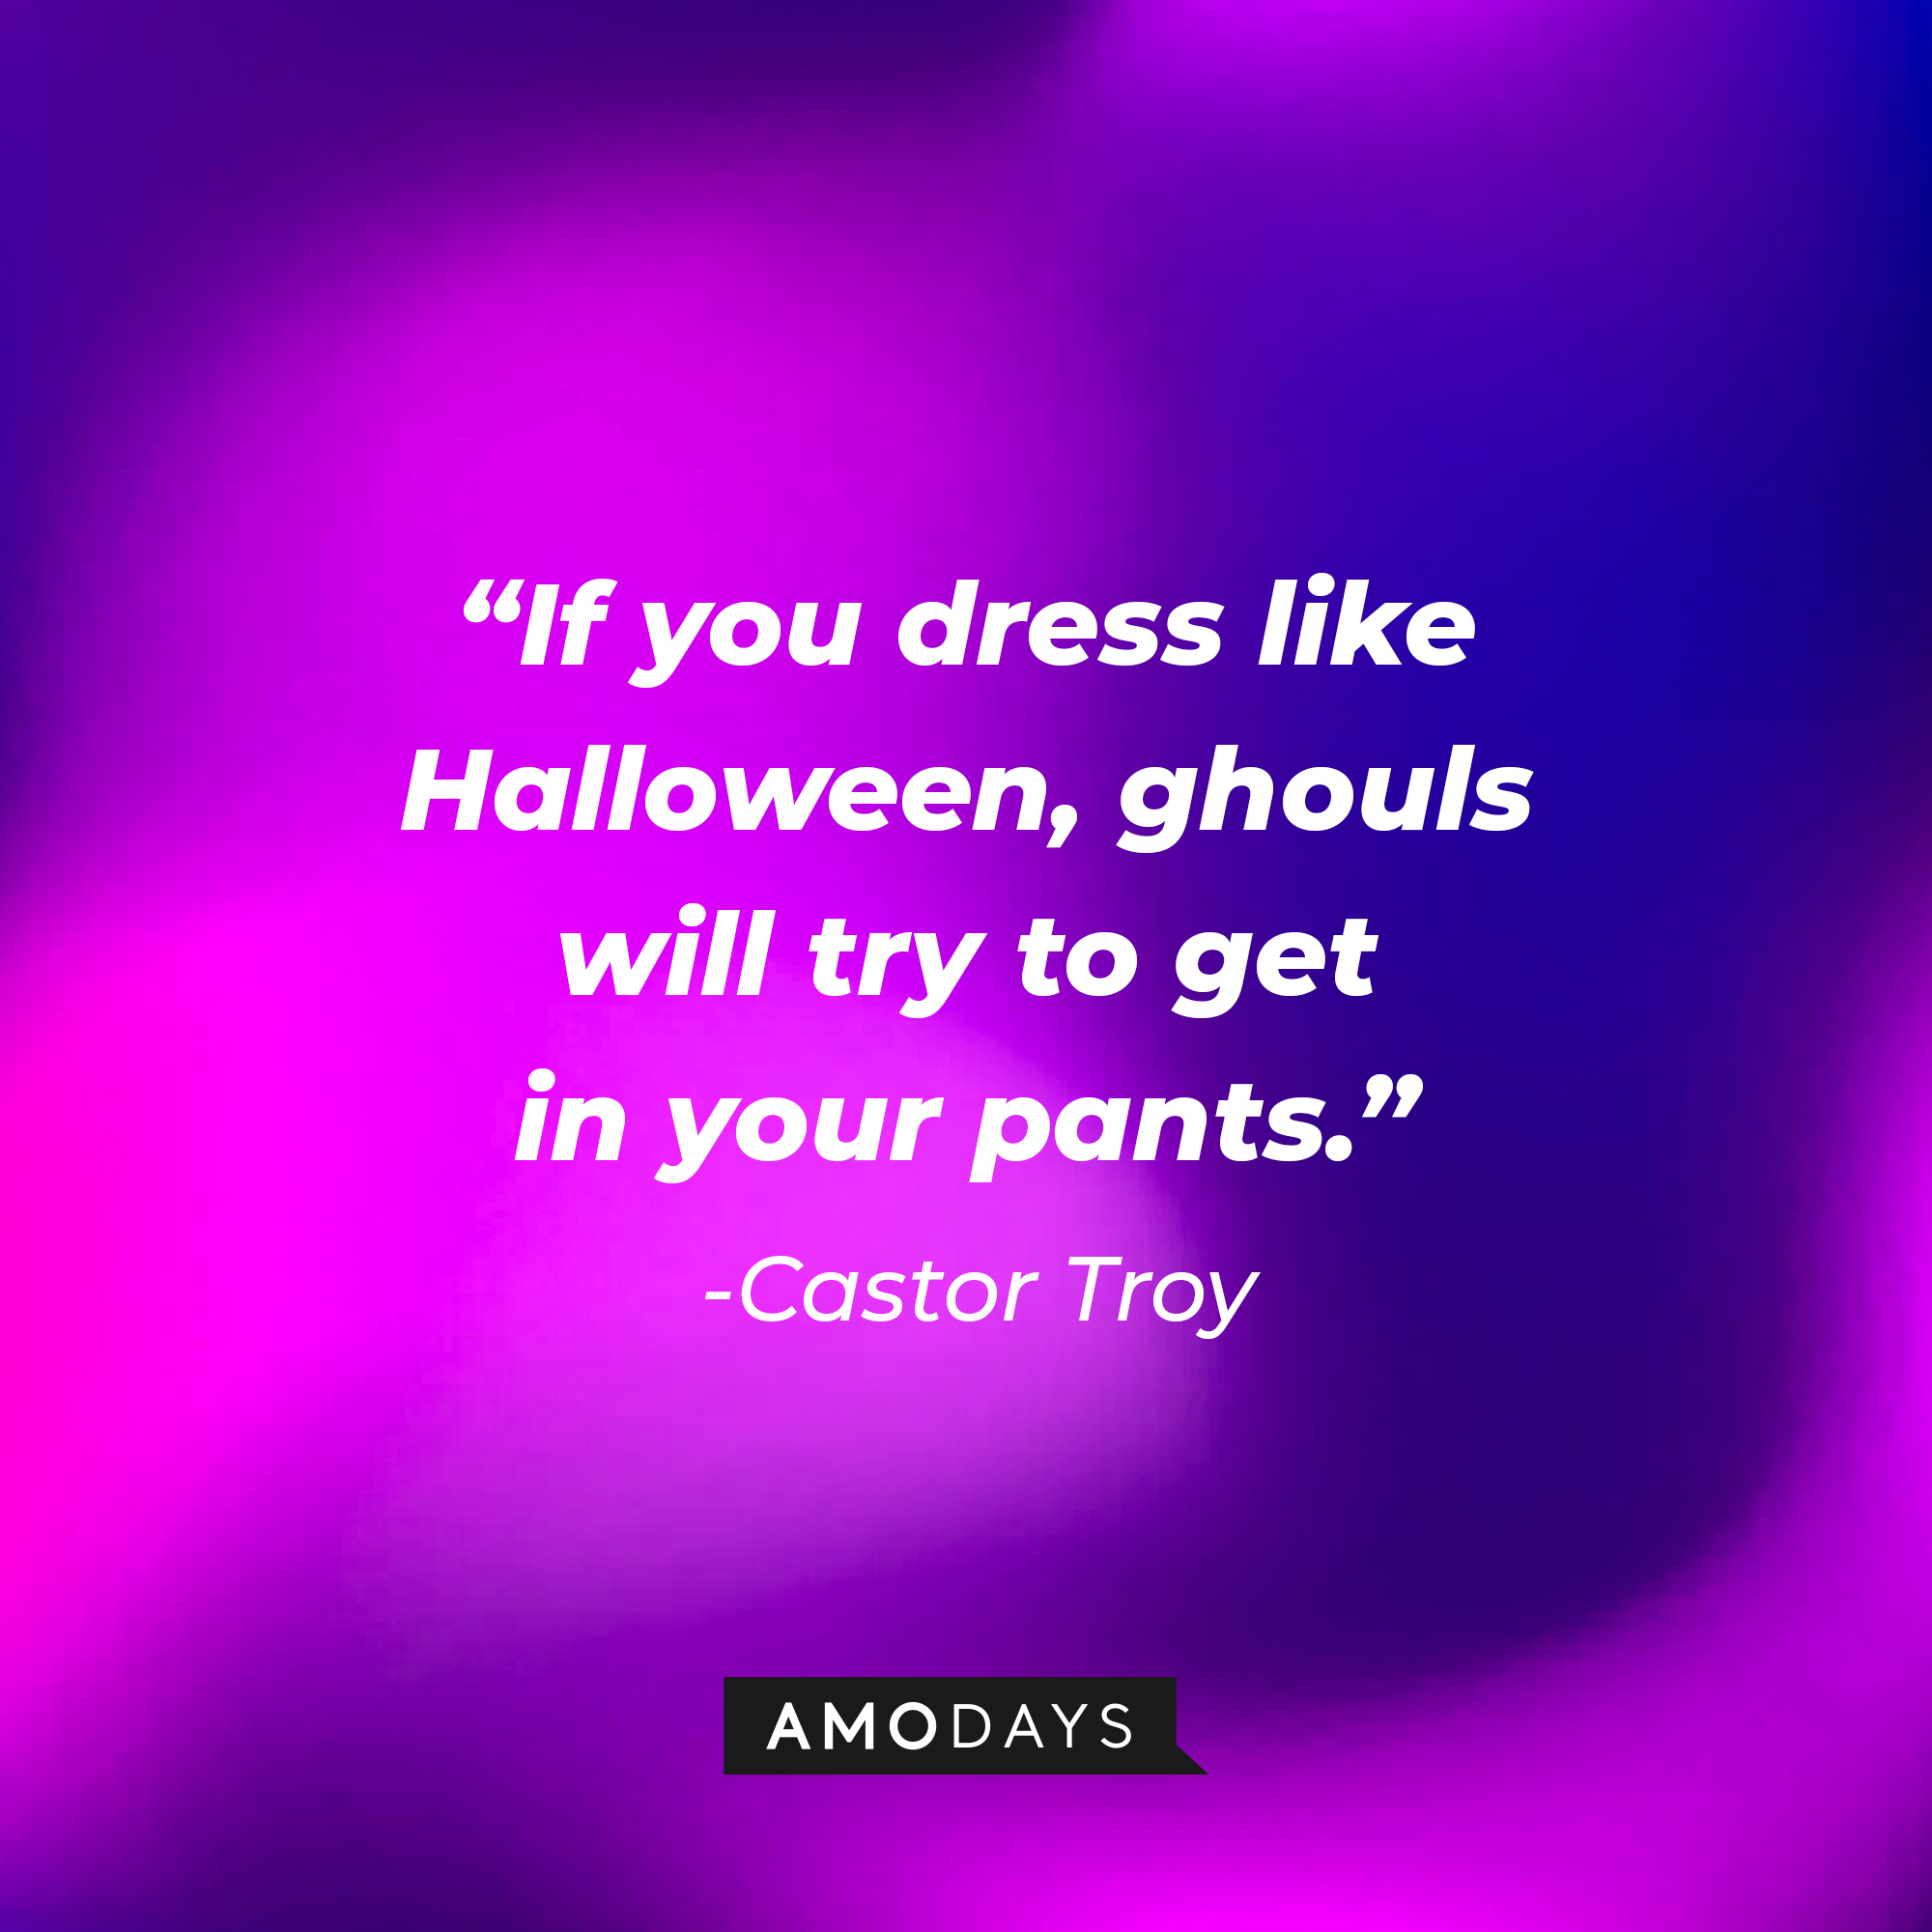 Castor Troy's quote: “If you dress like Halloween, ghouls will try to get in your pants.” : Source: Amodays